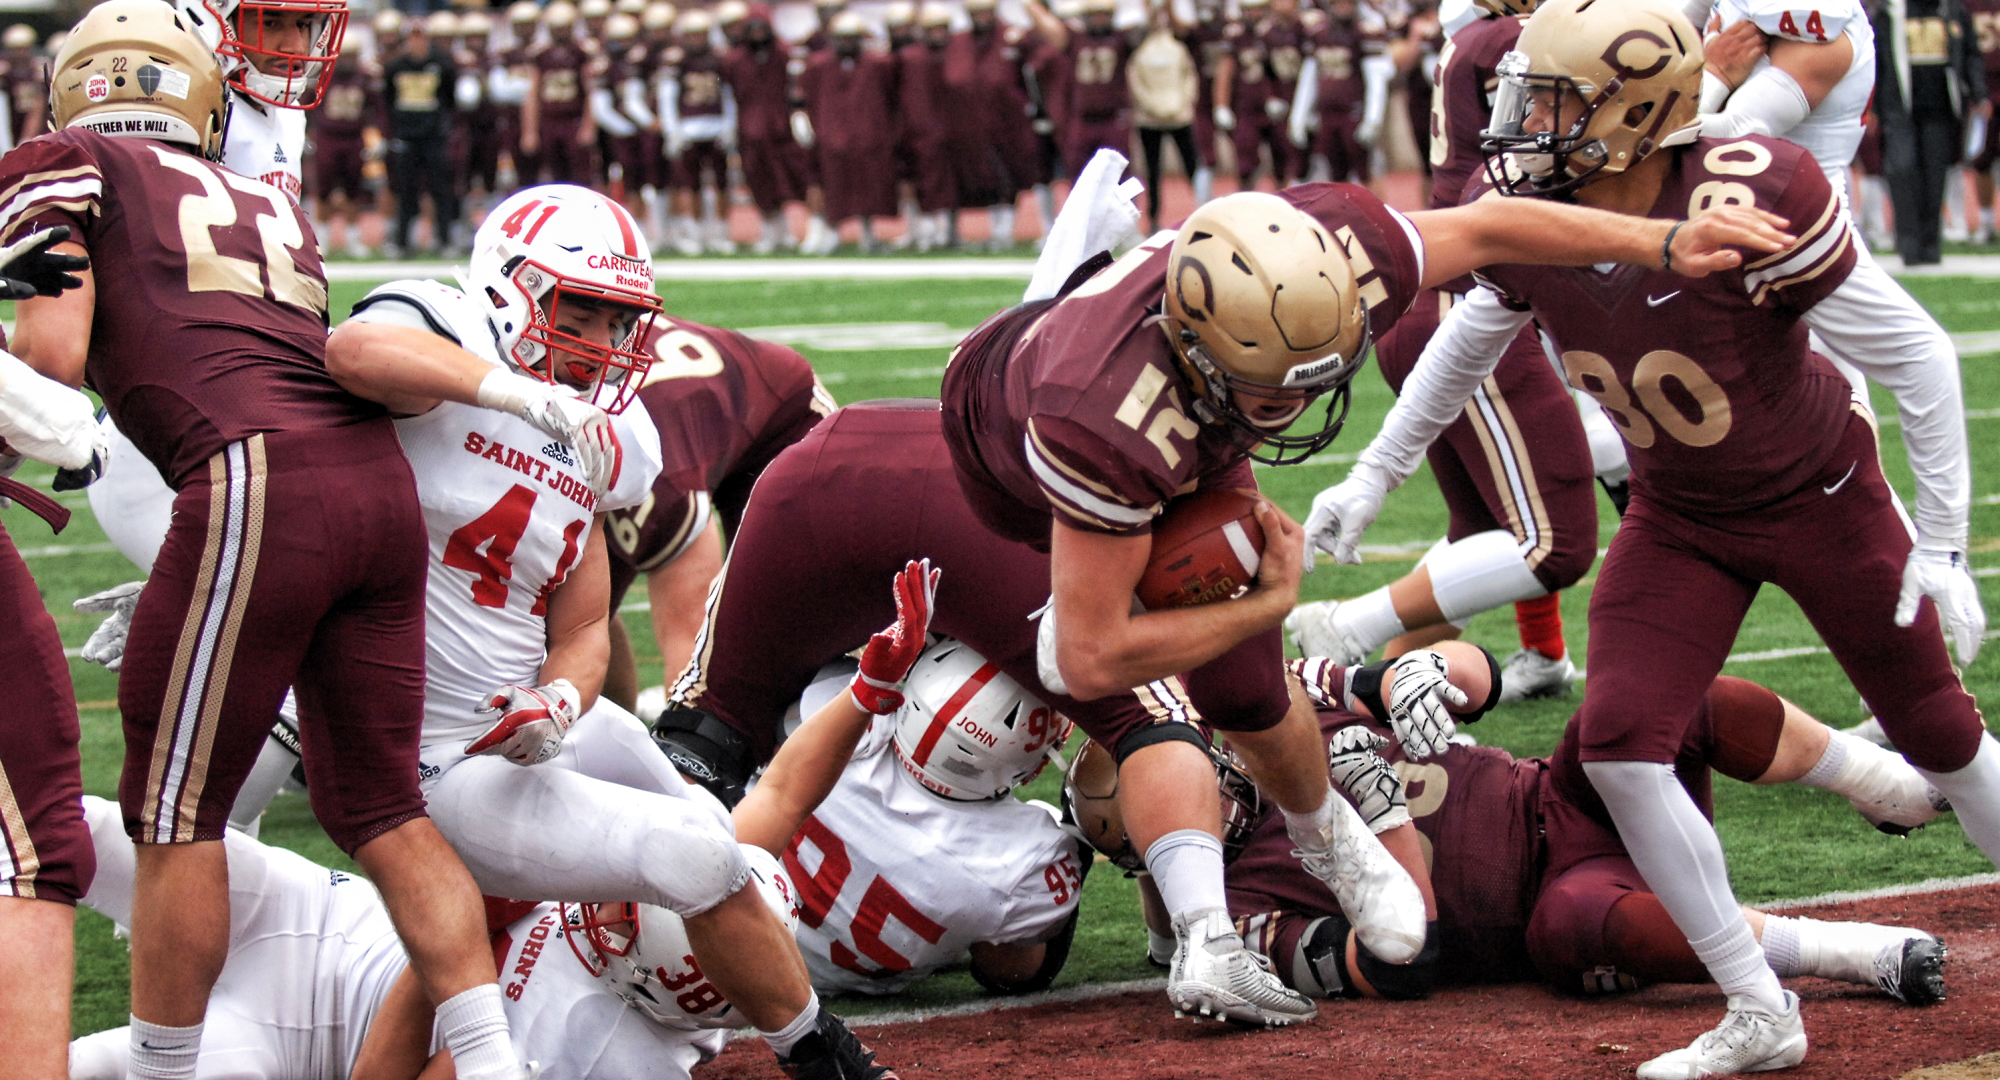 Junior quarterback Blake Kragnes dives into the end zone in the first quarter of the Cobbers' game with St. John's.